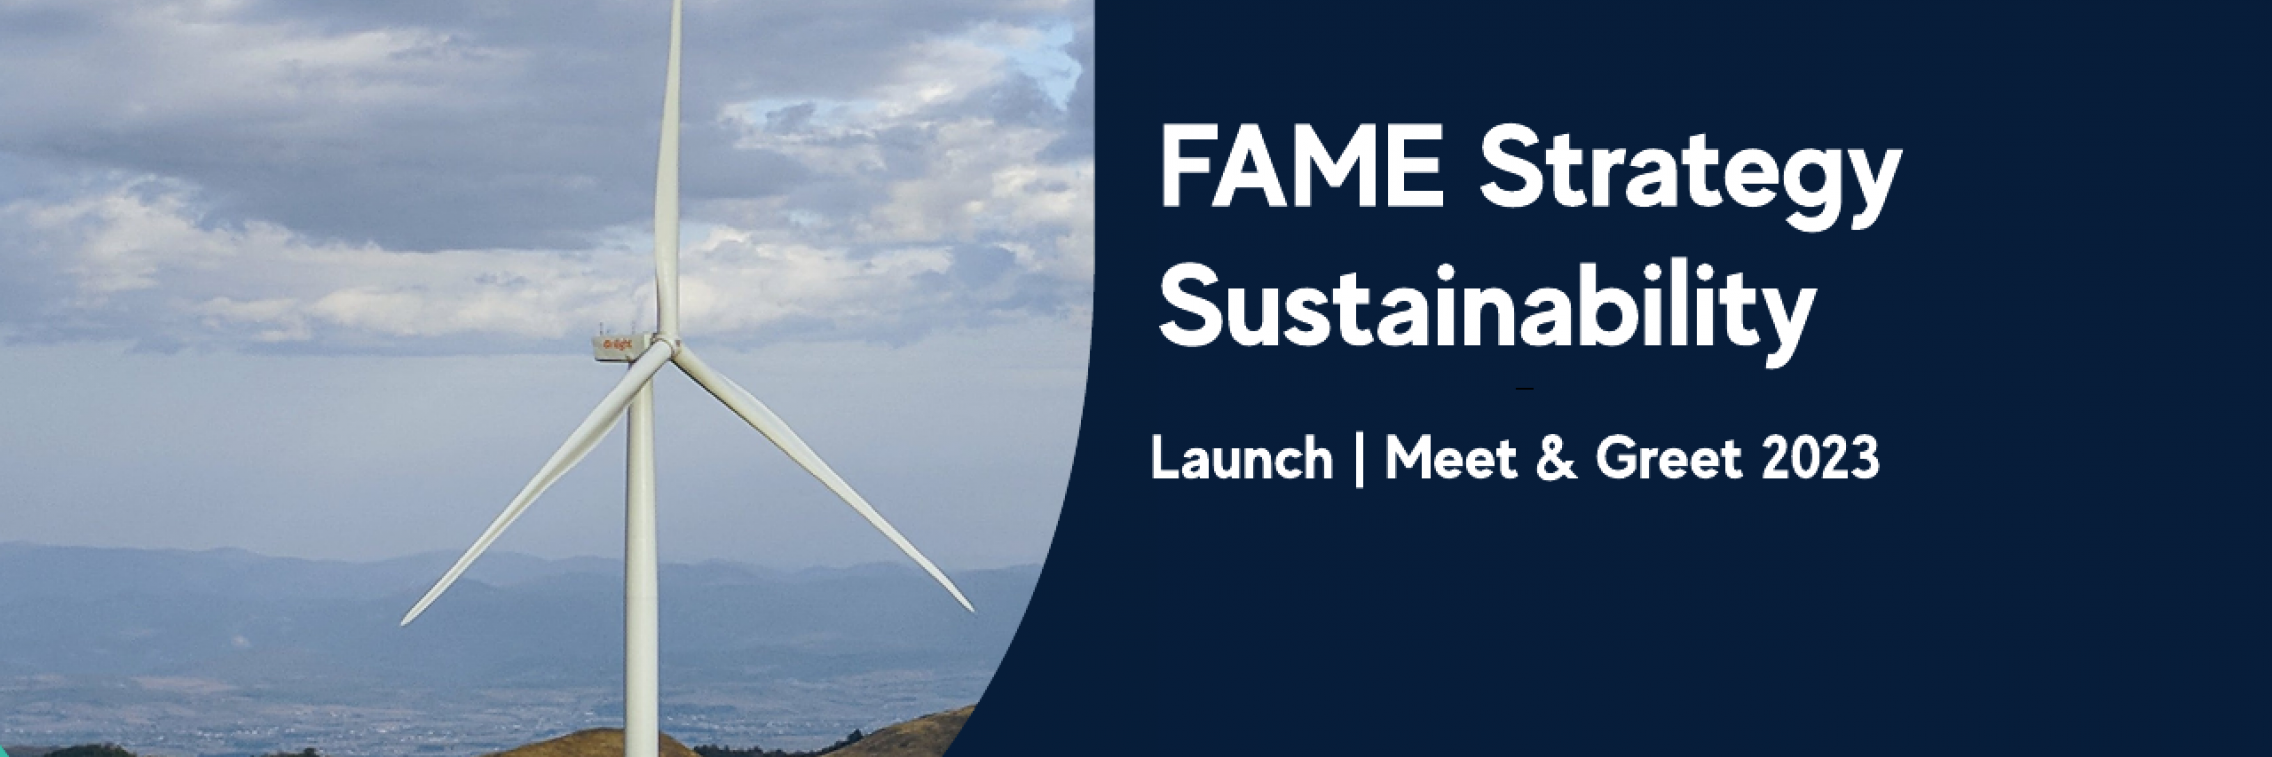 FAME Sustainability Strategy Launch and Meet & Greet Gallery 2023